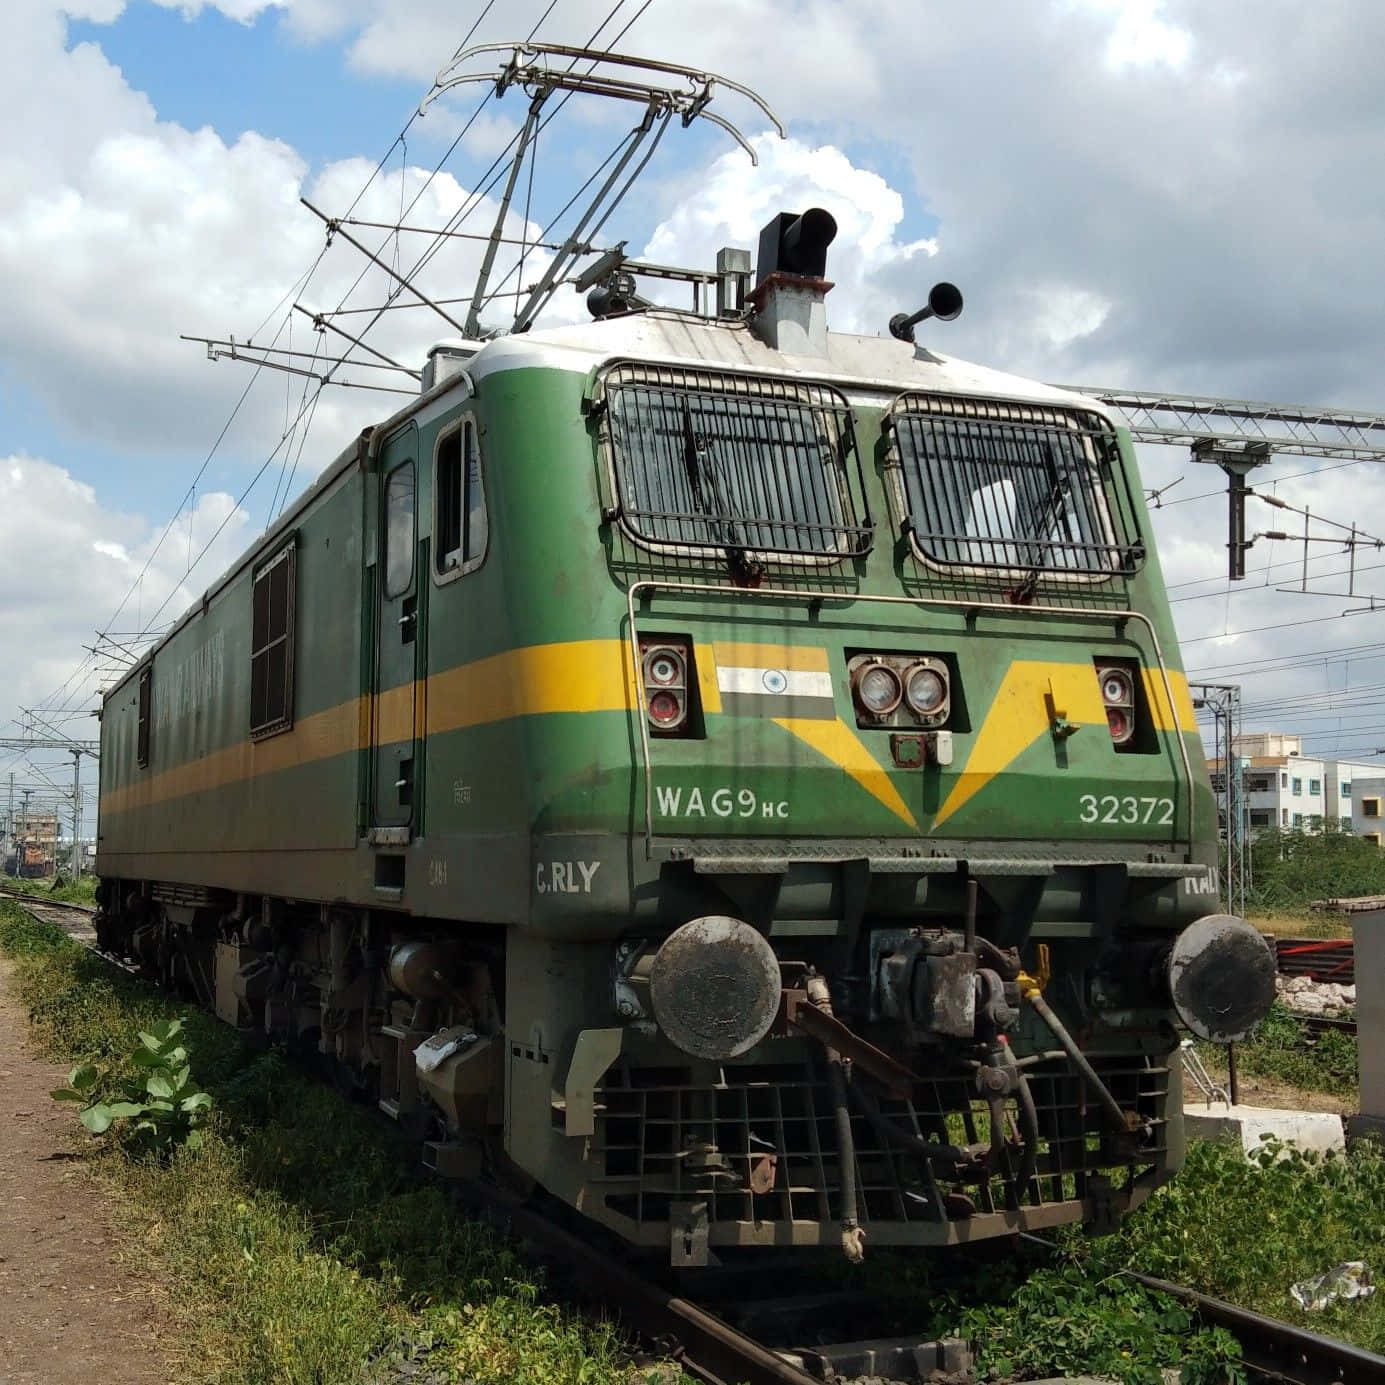 A Green And Yellow Train On The Tracks